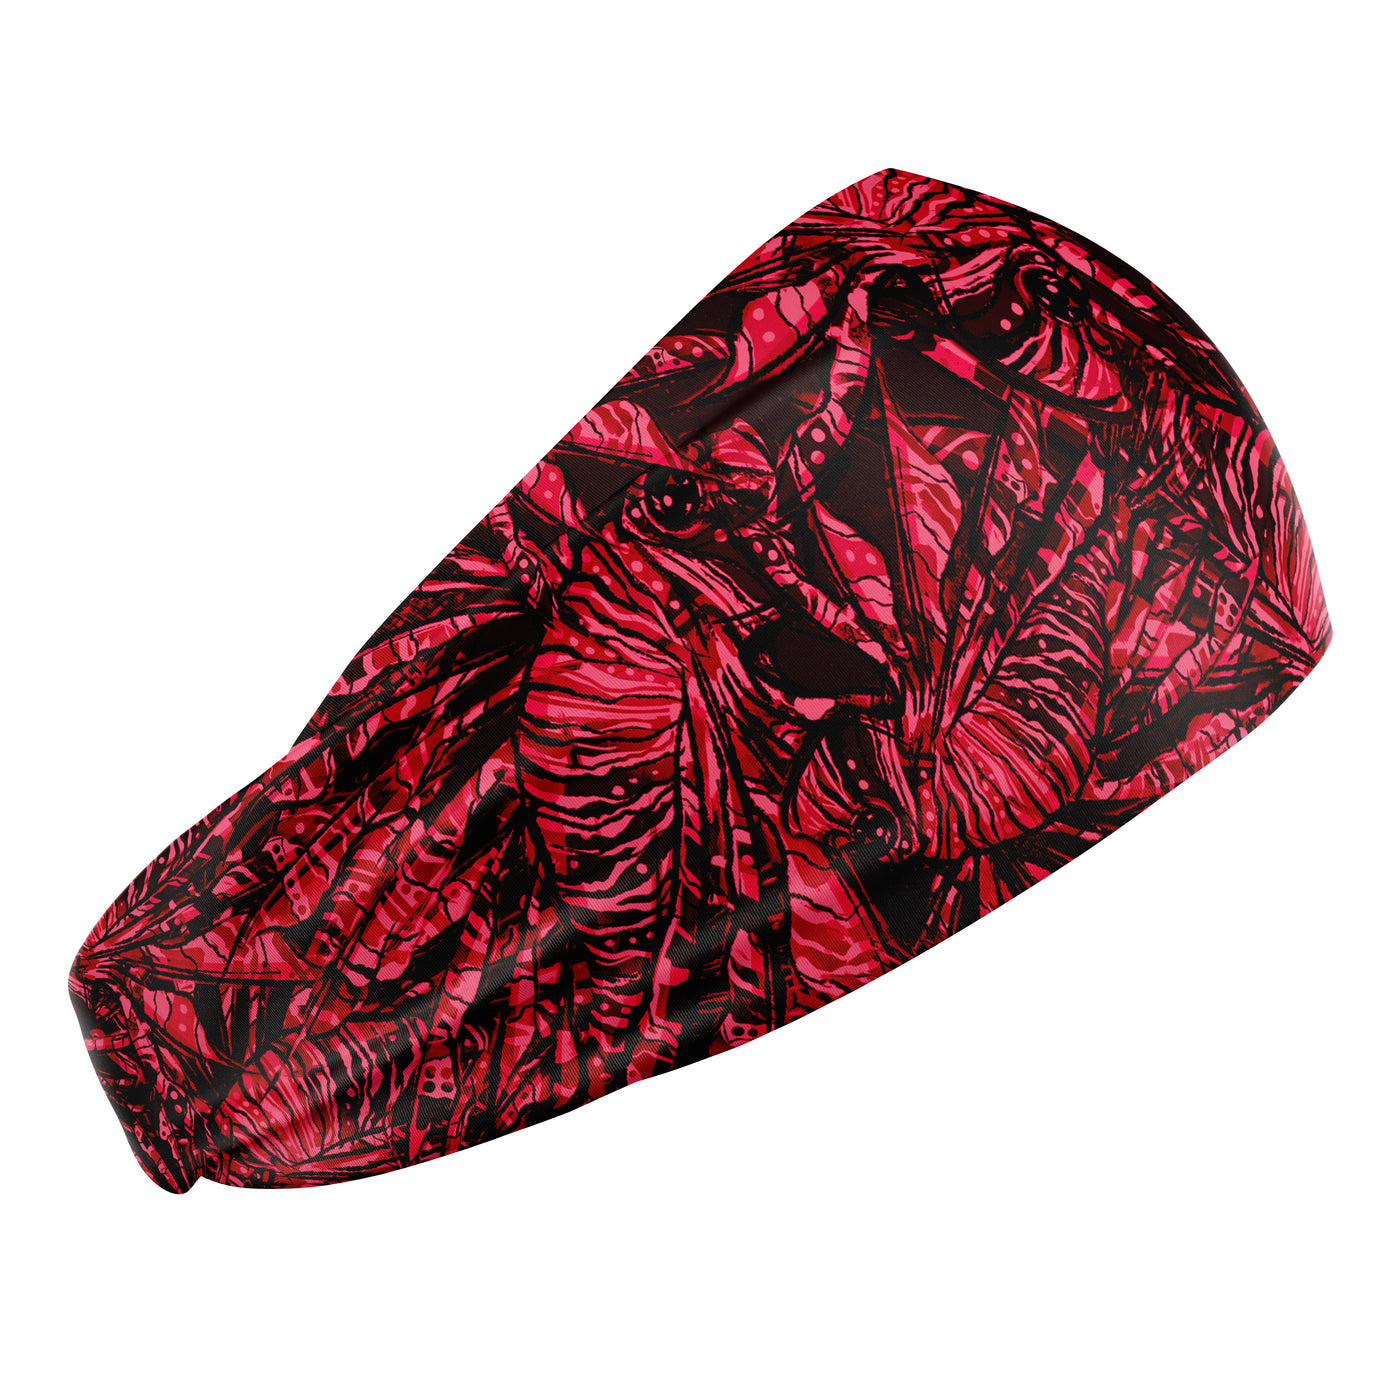 Eco-friendly Lionfish Invasion Scuba Head Band – Spacefish Army